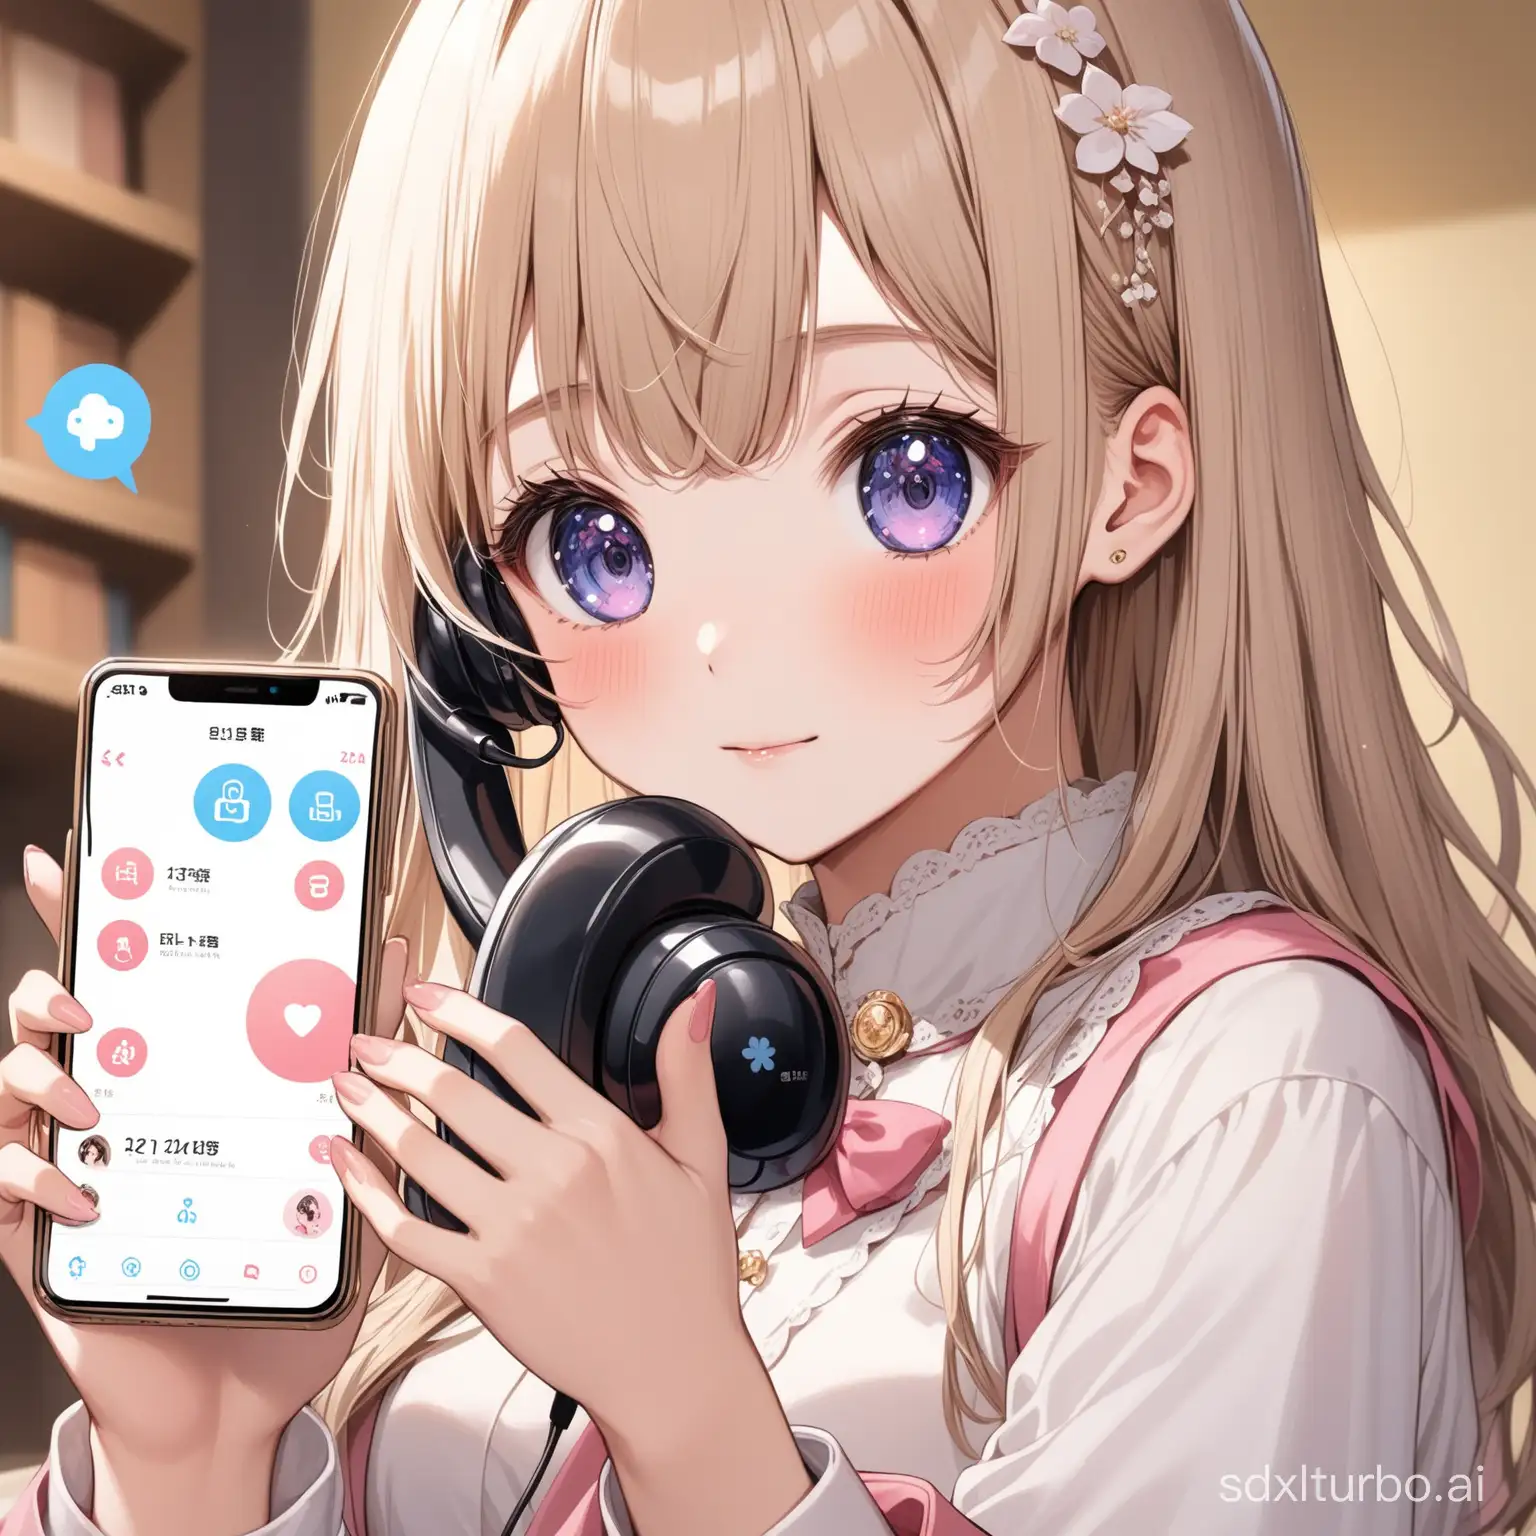 the ai helper on the phone in the girl's hand.